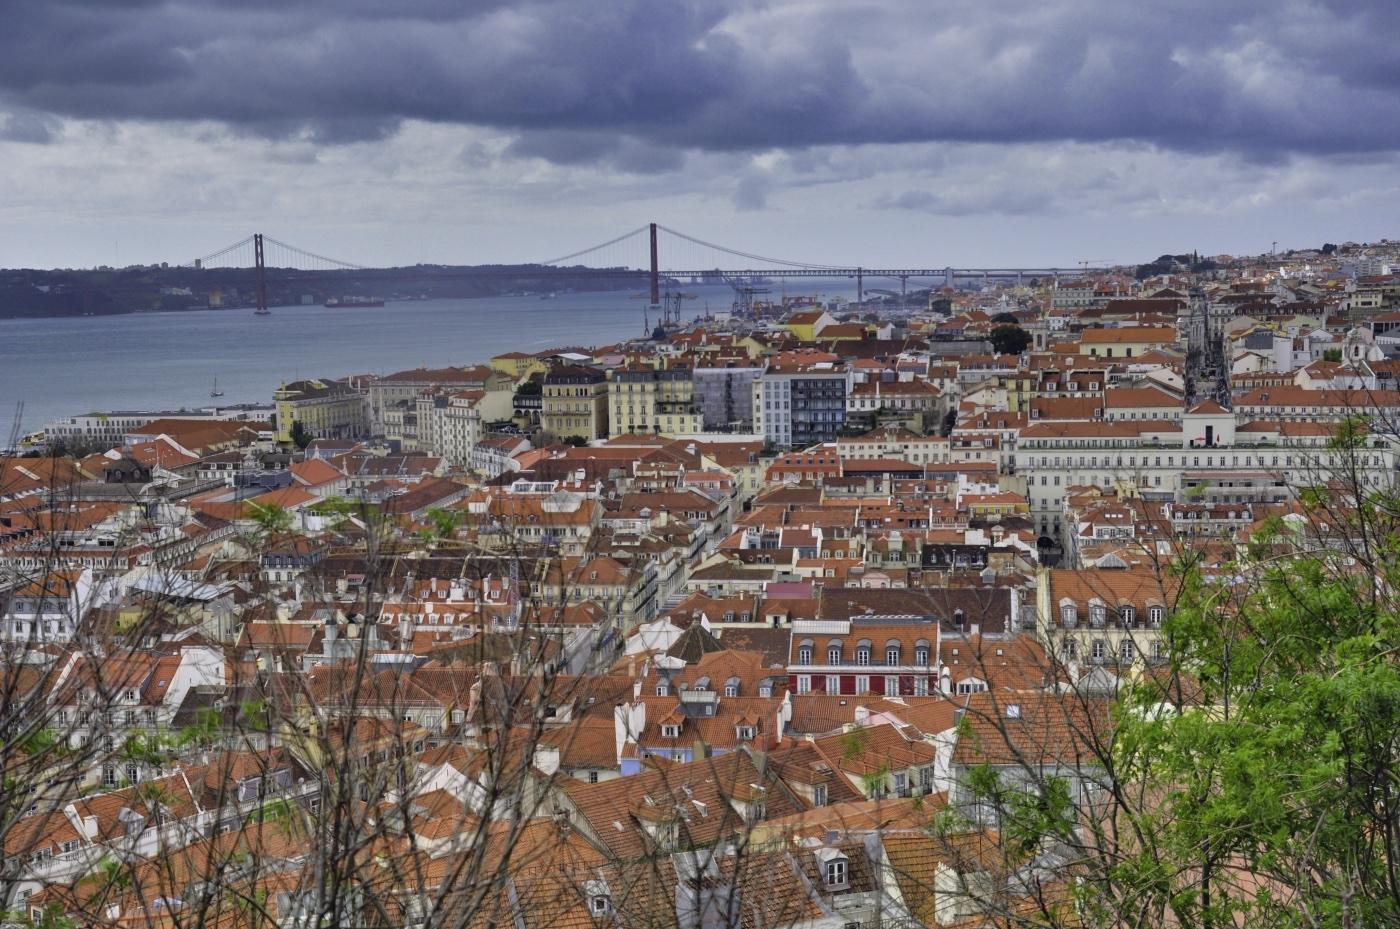 Lisbon is the city San Francisco could’ve been if the Internet hadn’t totally effed it up.